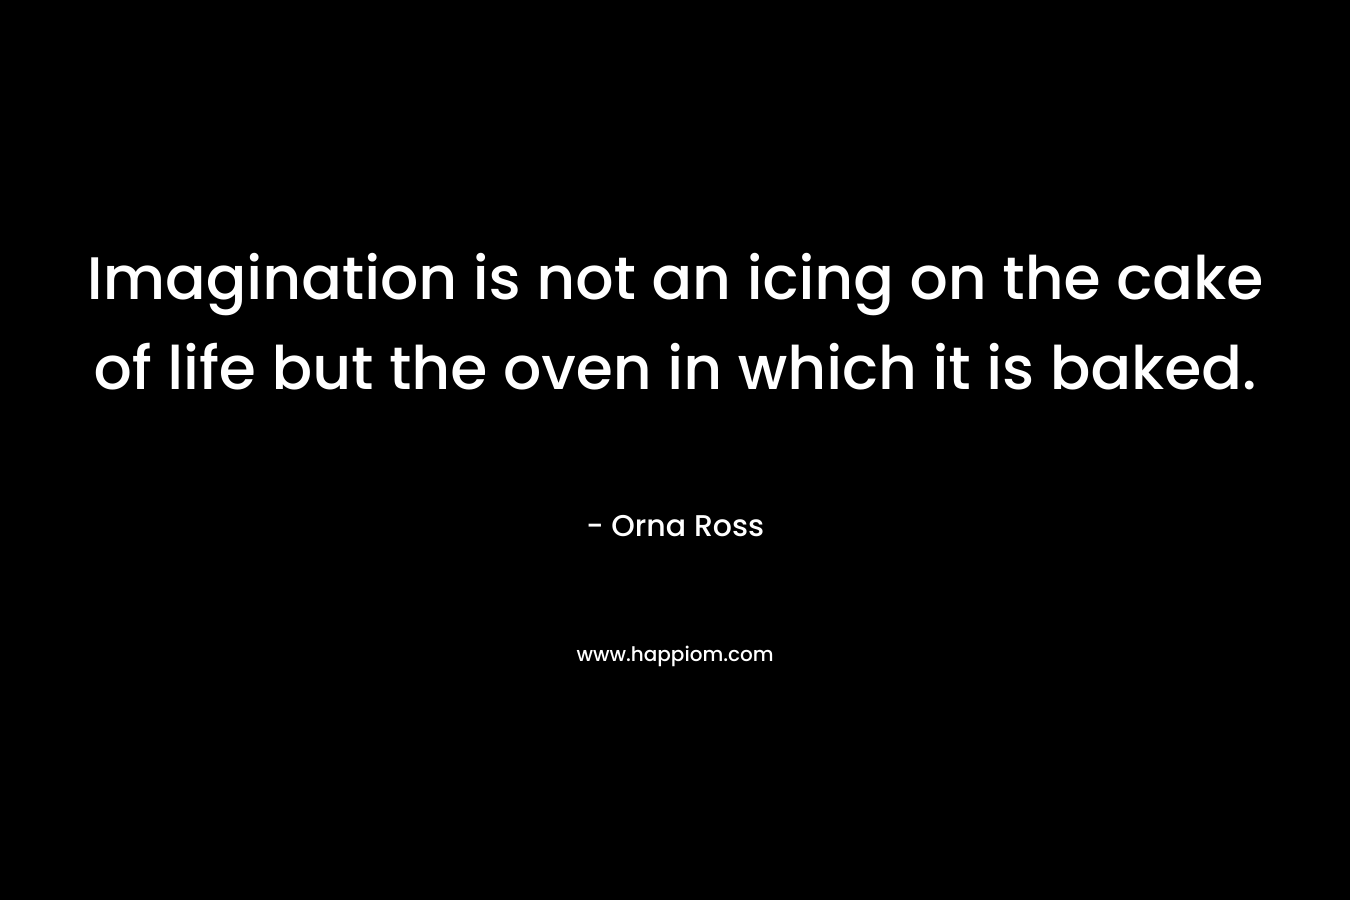 Imagination is not an icing on the cake of life but the oven in which it is baked.